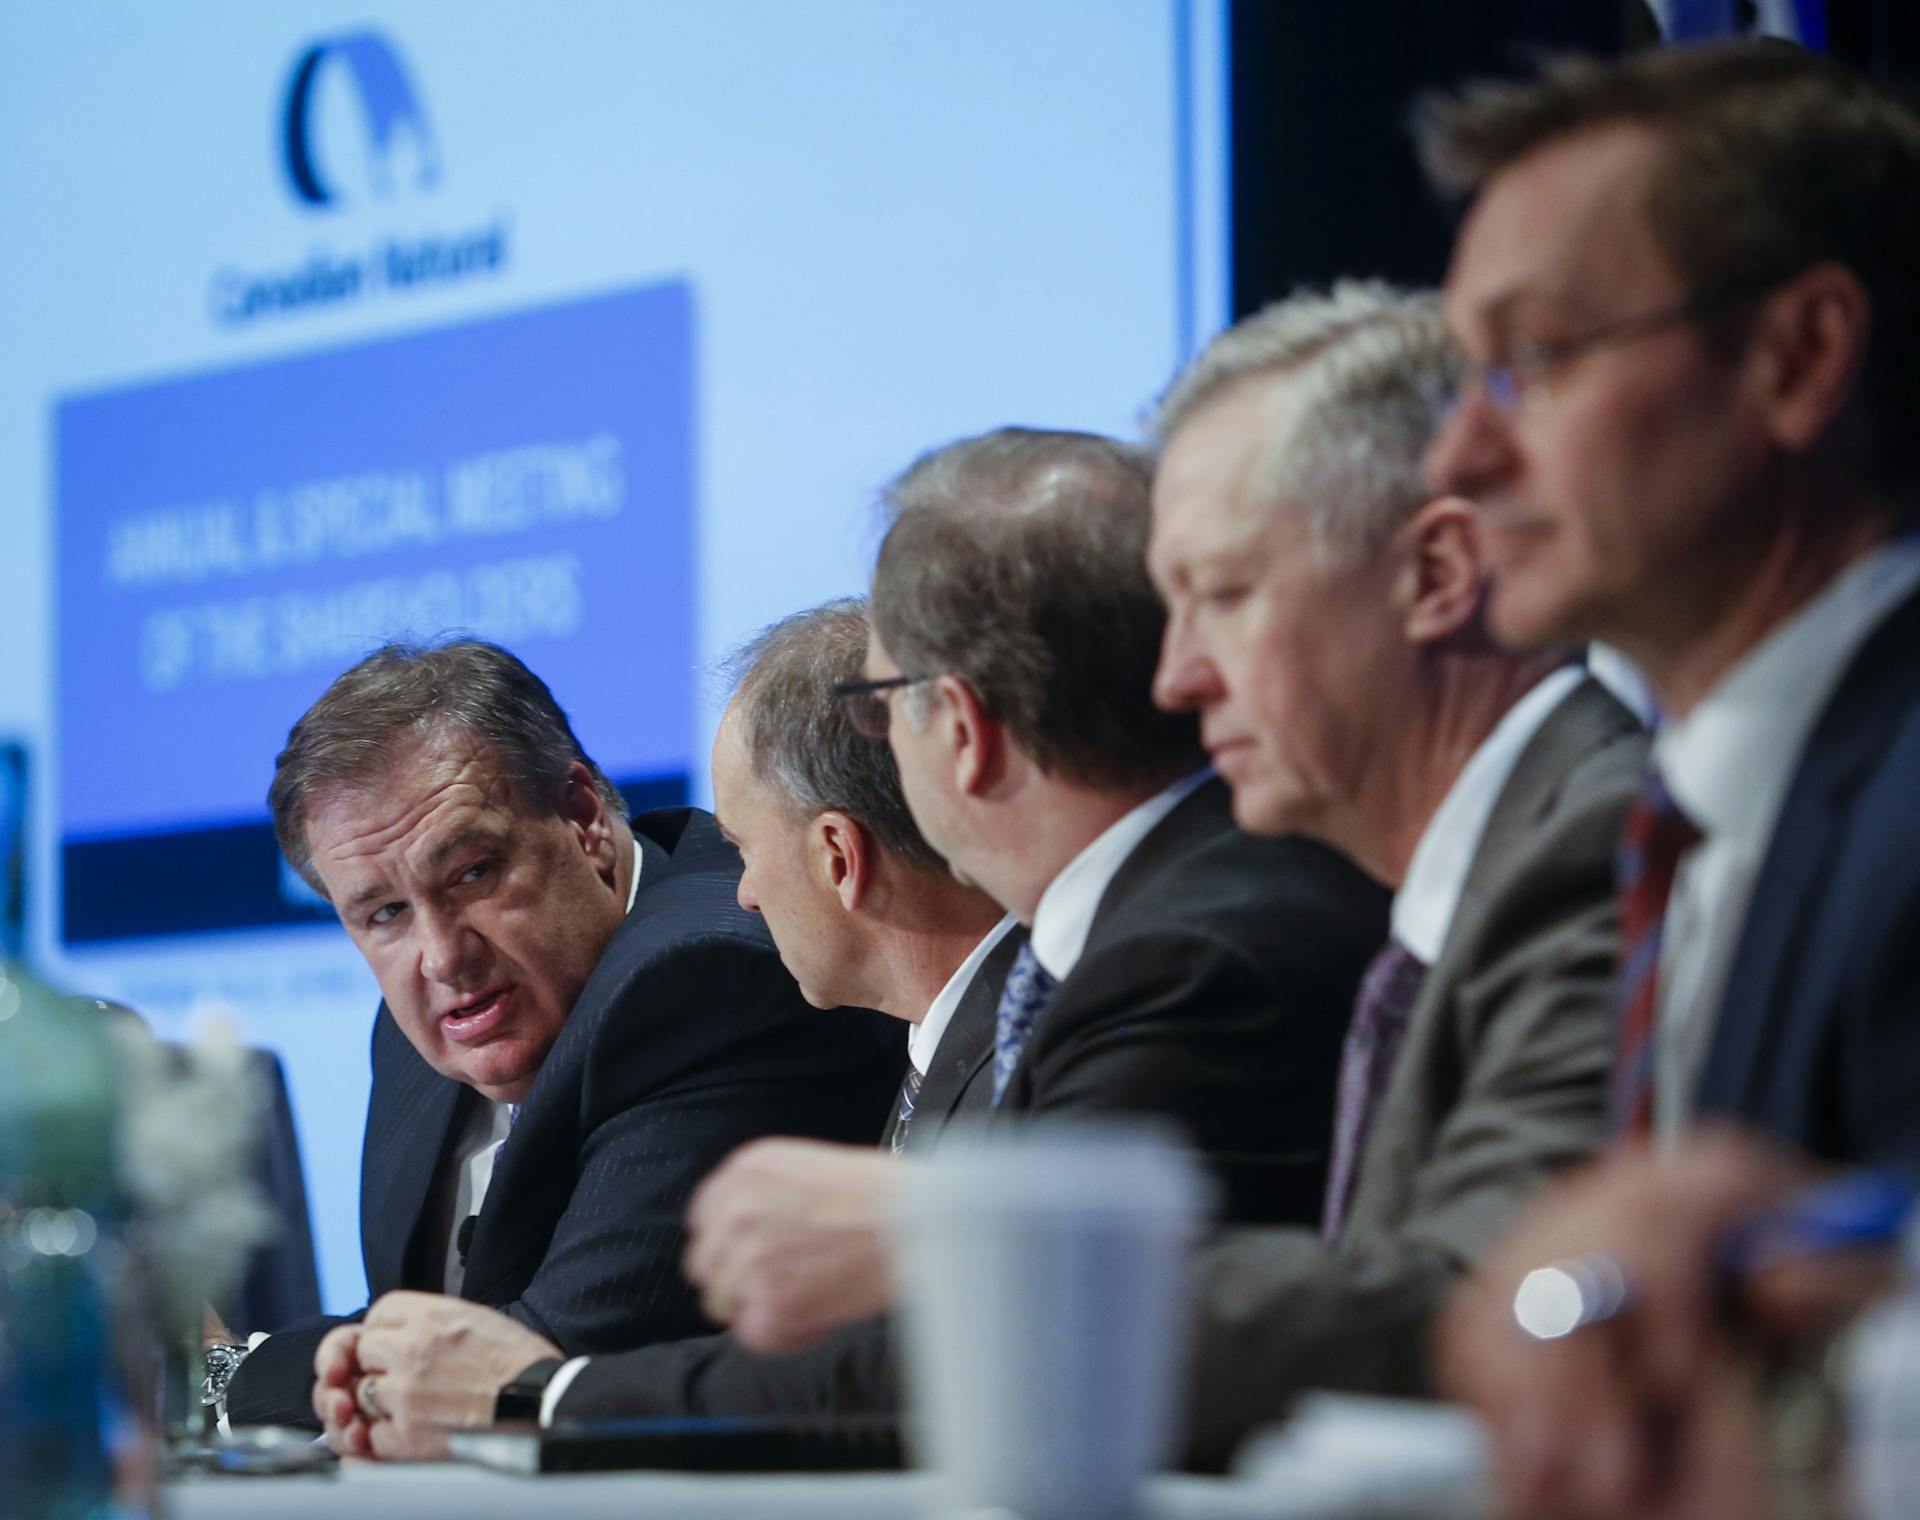 A panel of men at a conference